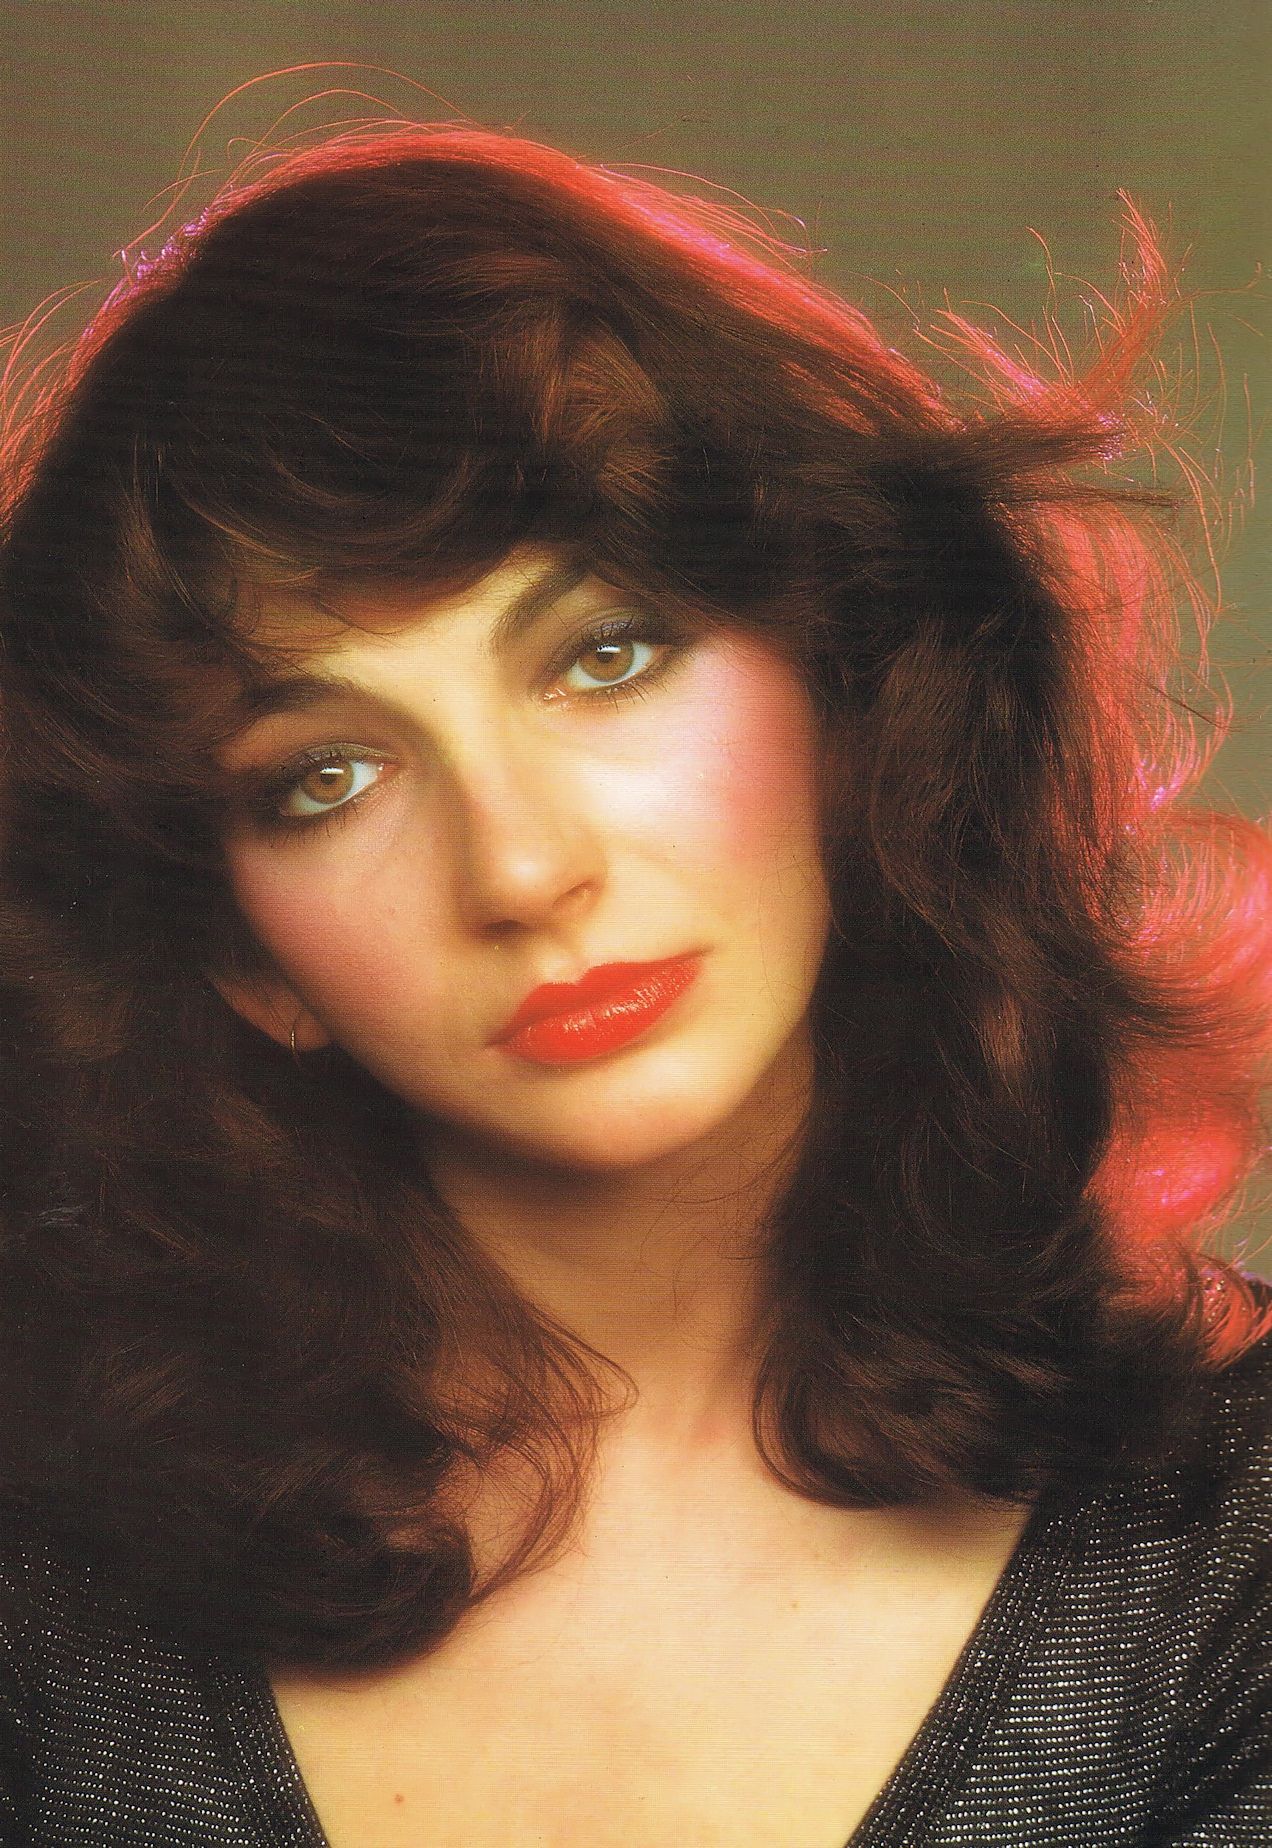 Kate Bush Lyrics Photos Pictures Paroles Letras Text For Every Songs A pseudonym to fool him. always on the run